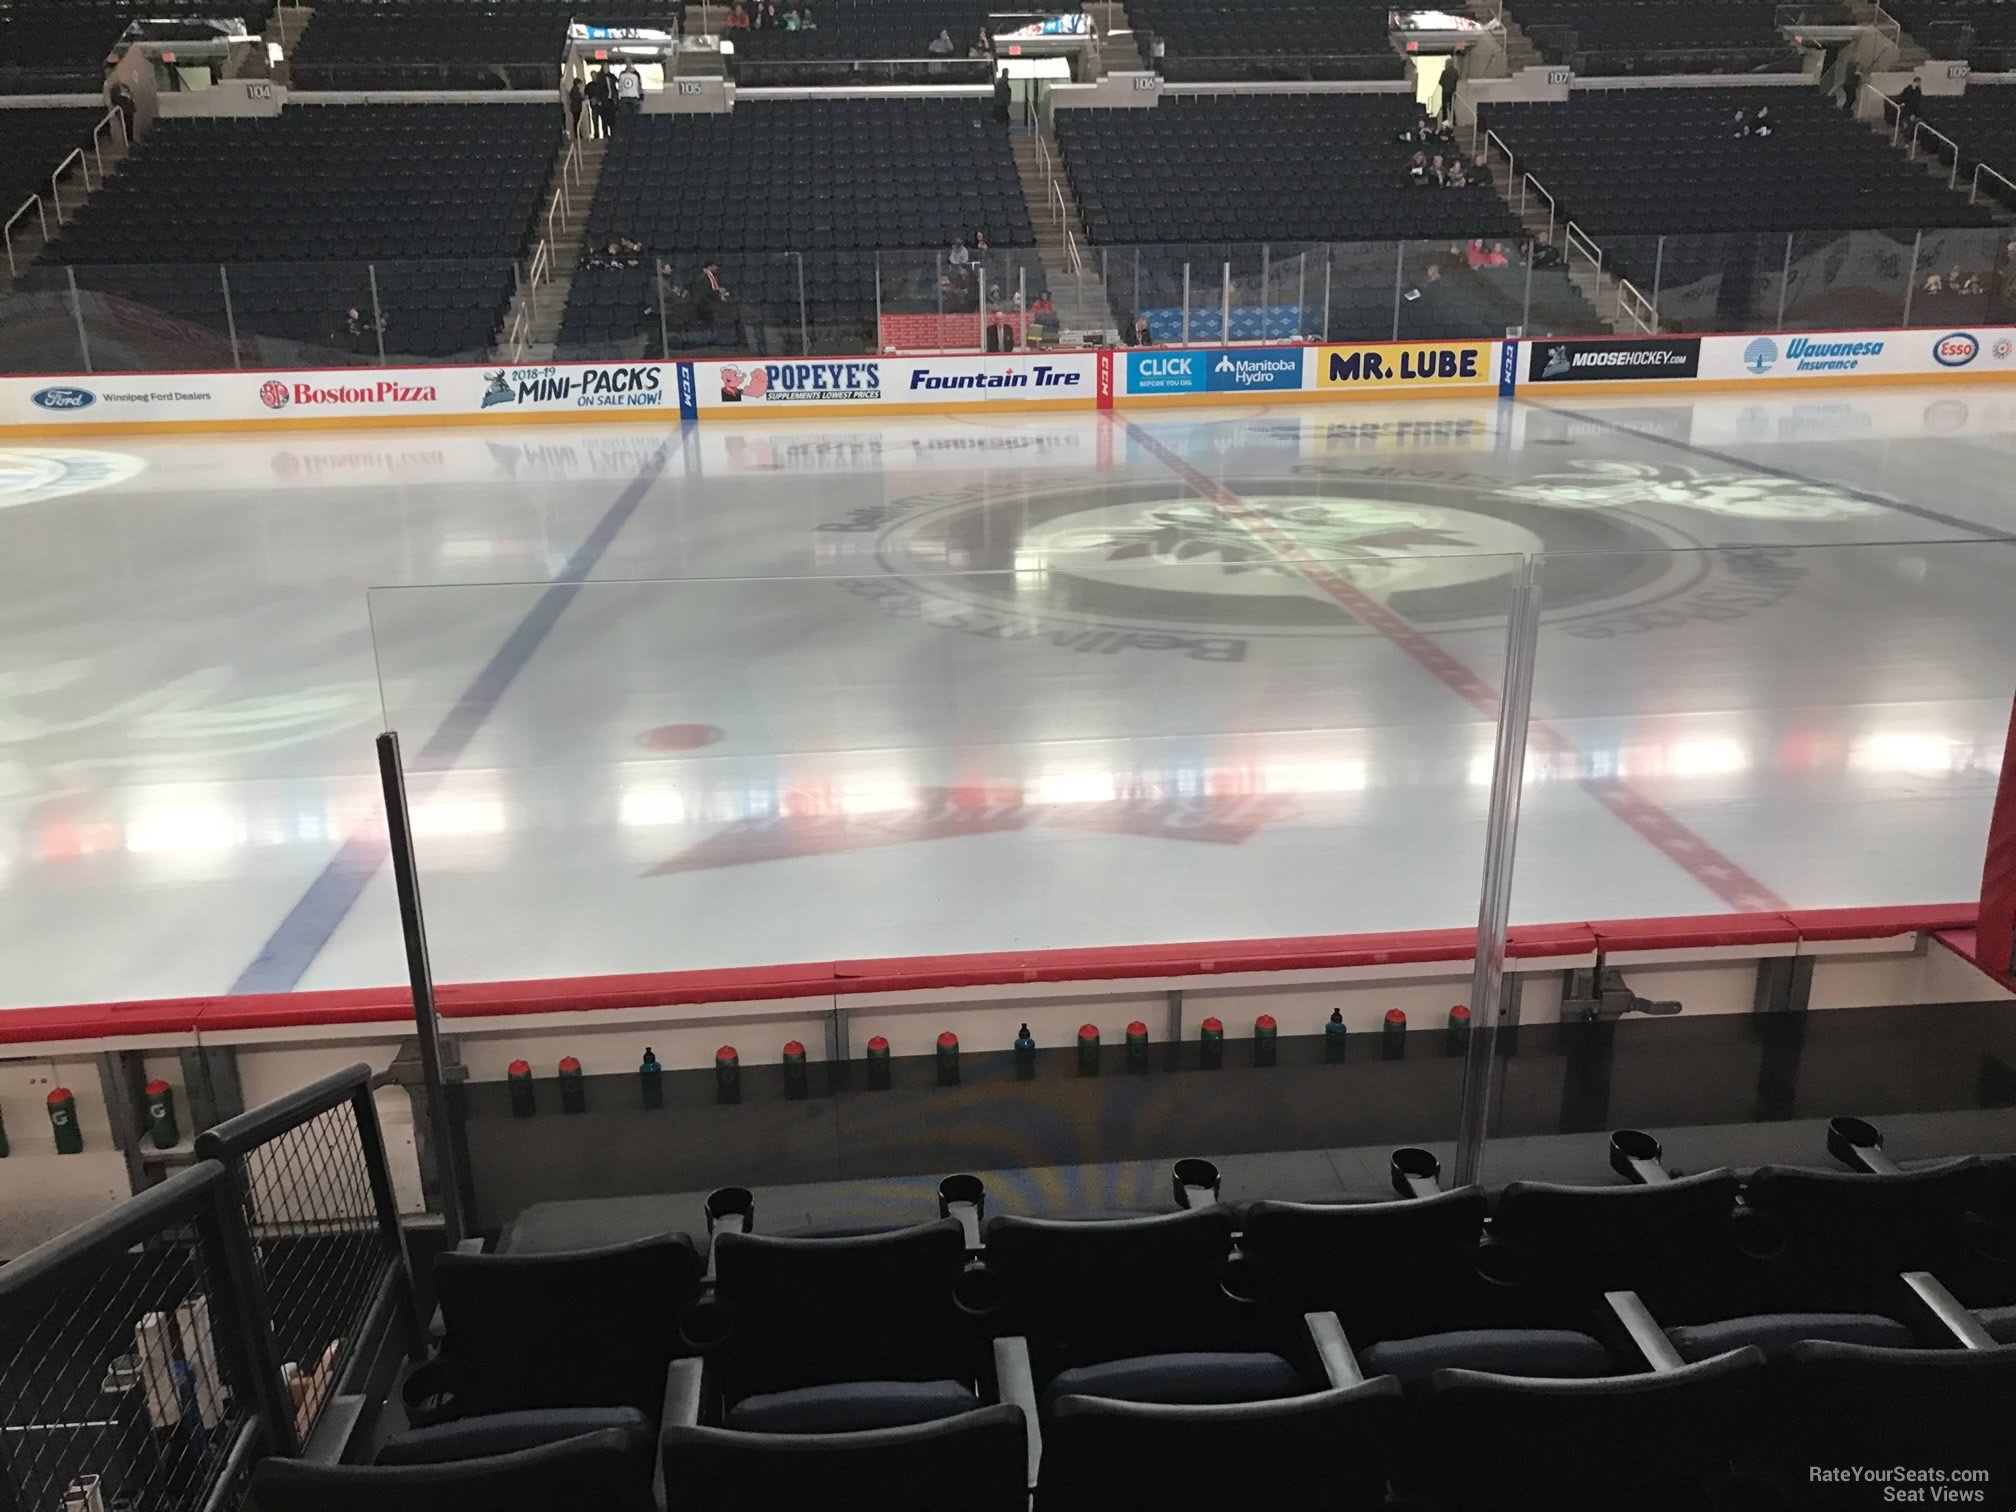 section 119 seat view  for hockey - canada life centre